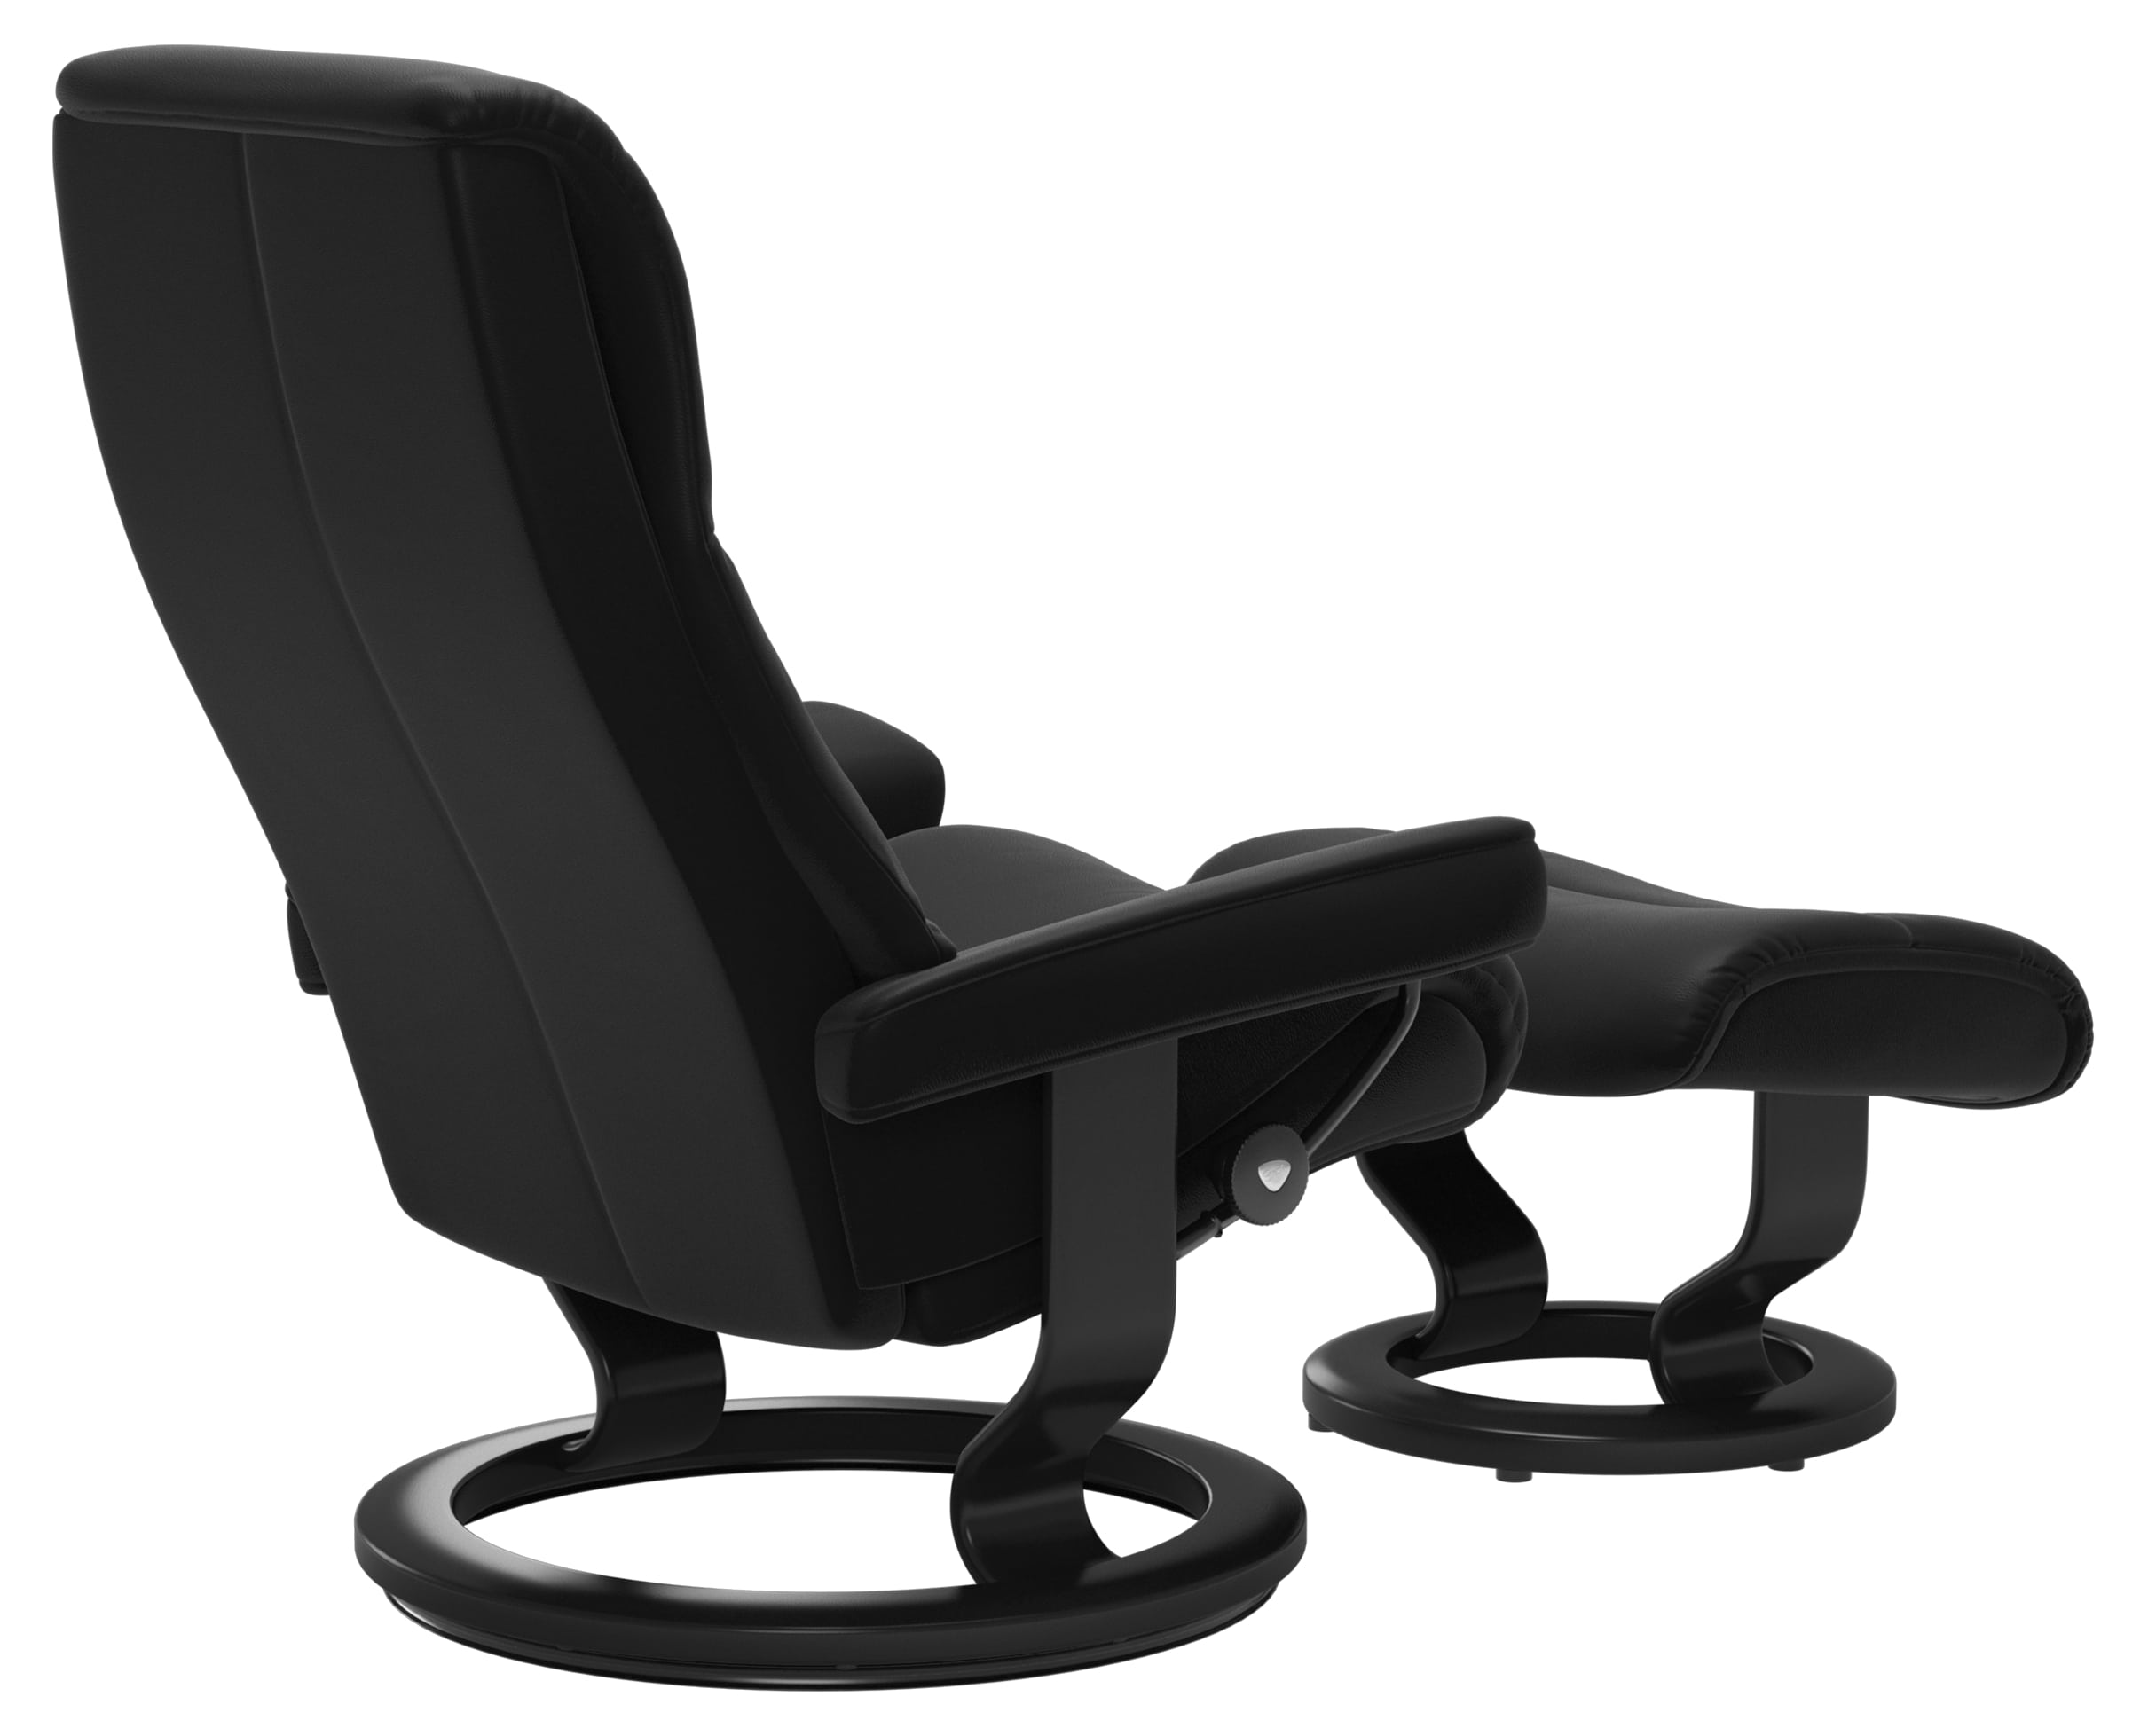 Paloma Leather Special Black S/M/L & Black Base | Stressless View Classic Recliner | Valley Ridge Furniture